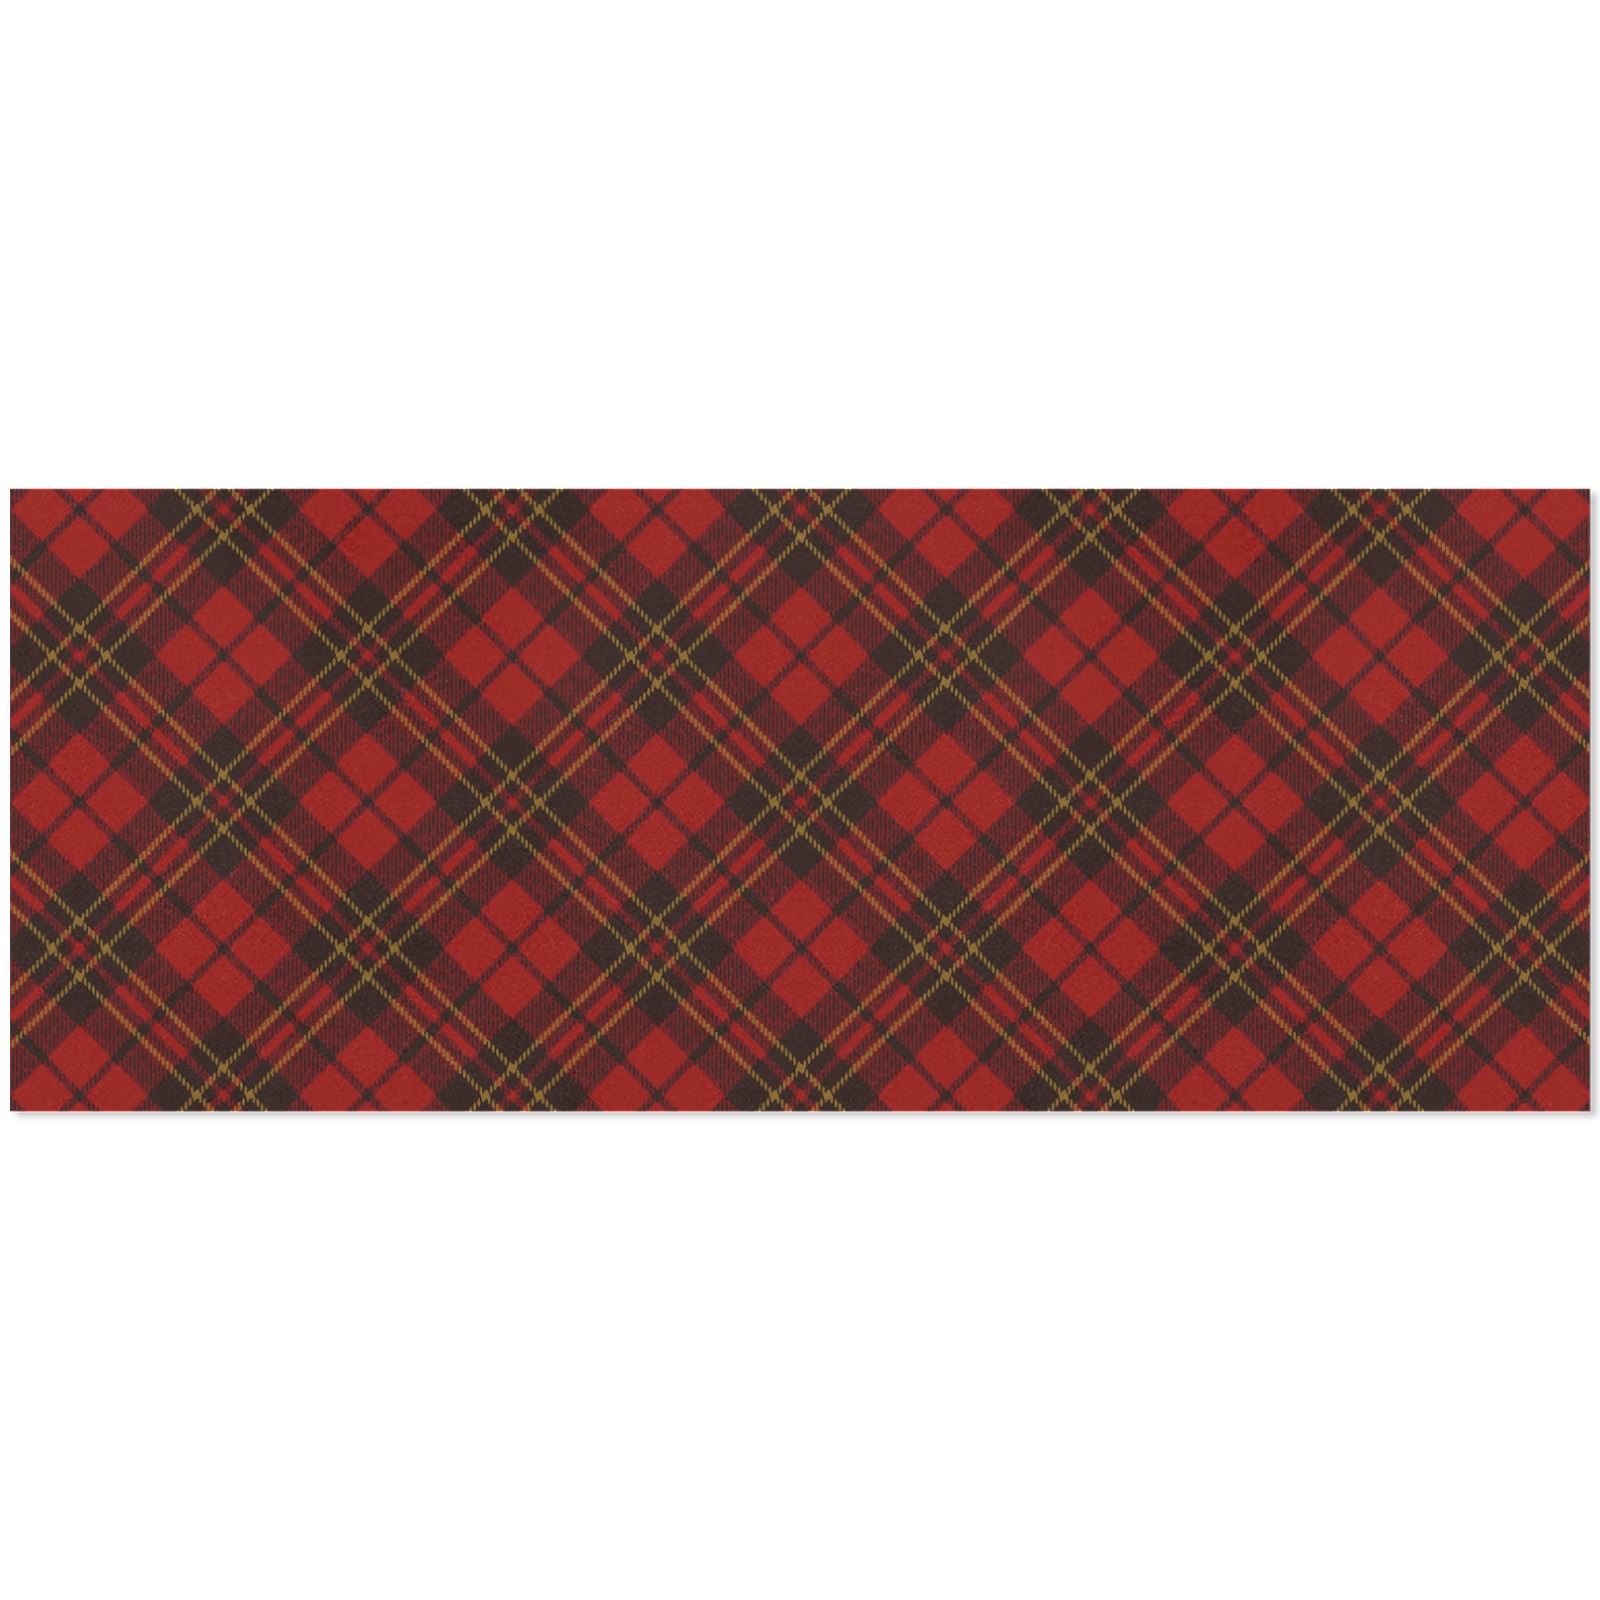 Red tartan plaid winter Christmas pattern holidays Gift Wrapping Paper 58"x 23" (3 Rolls)